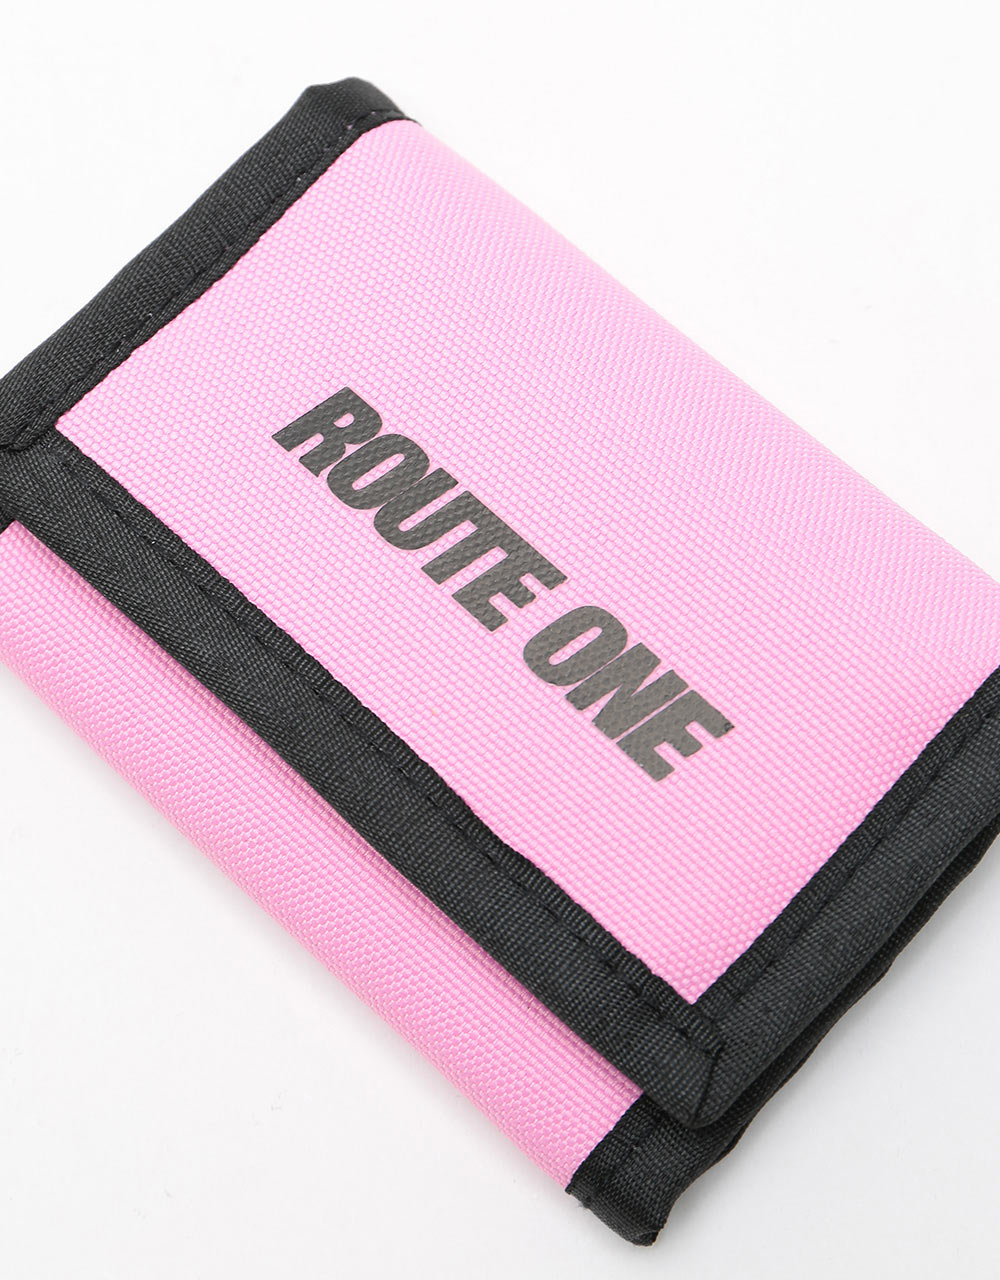 Route One Athletic Tri-Fold Wallet - Light Pink